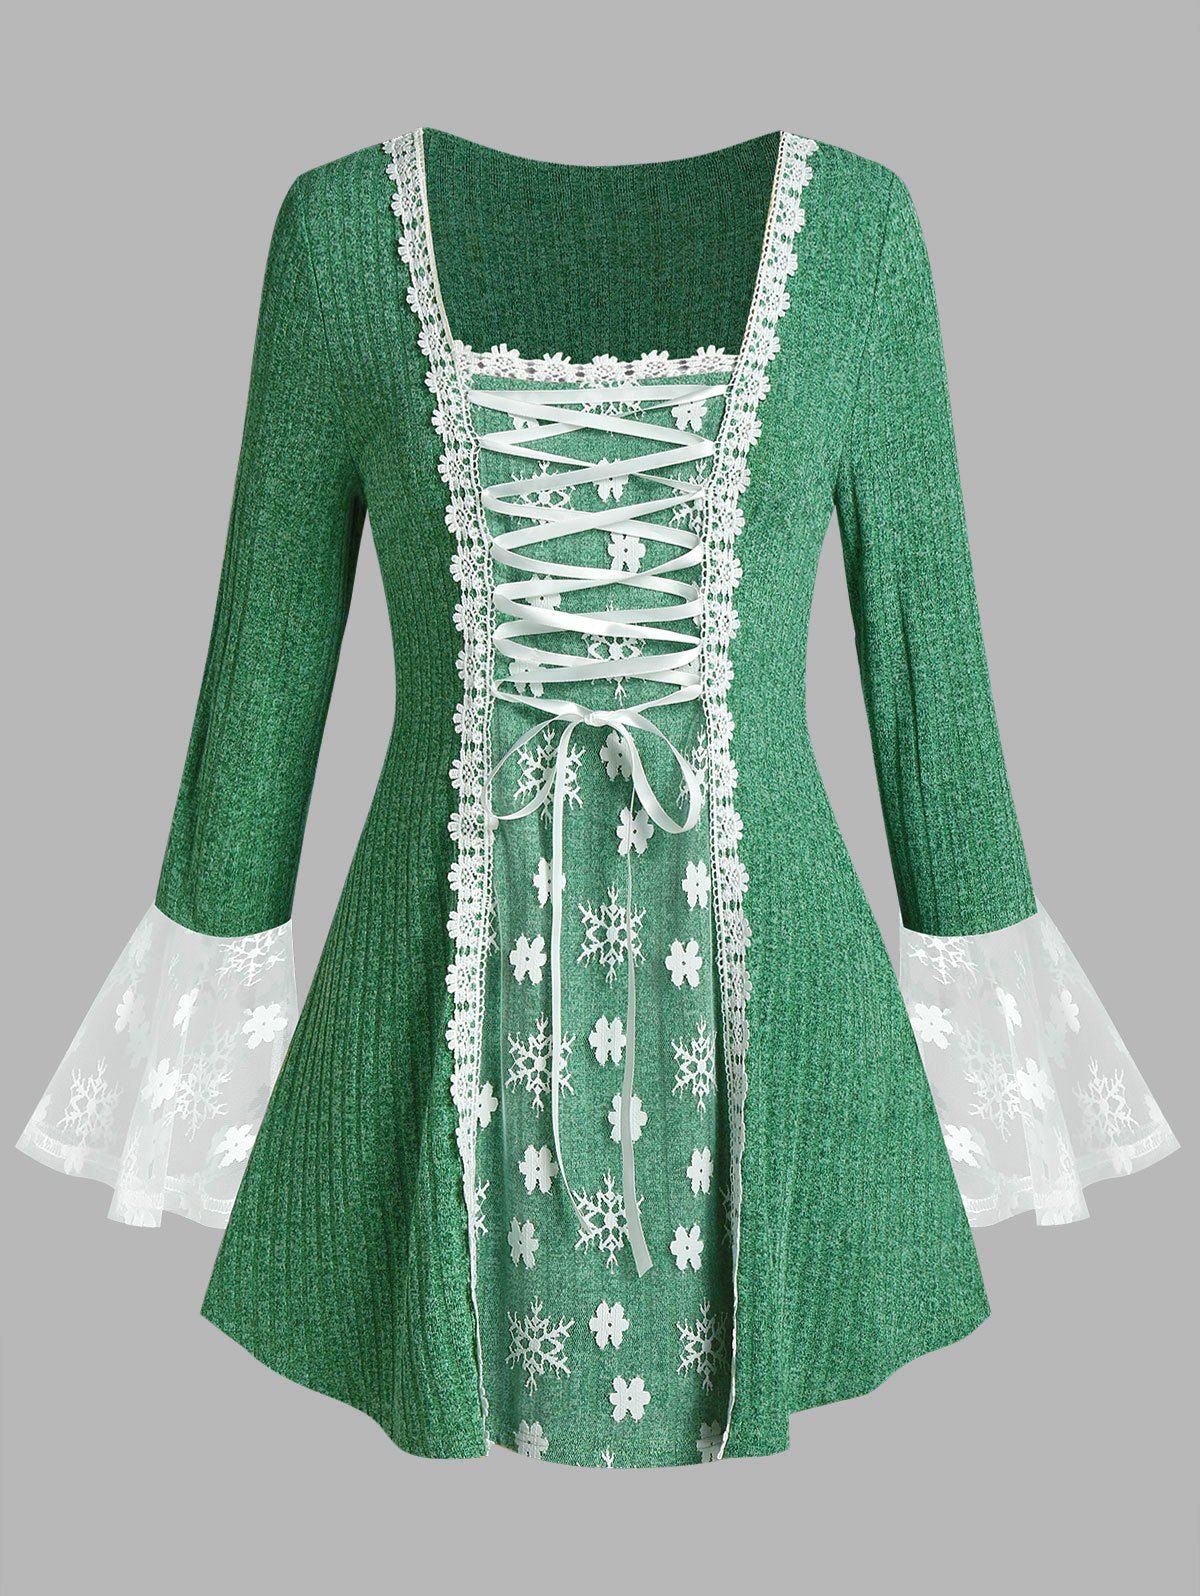 Plus Size Lace-up Floral Applique Snowflake Bell Sleeve Sweater - GREEN 1X